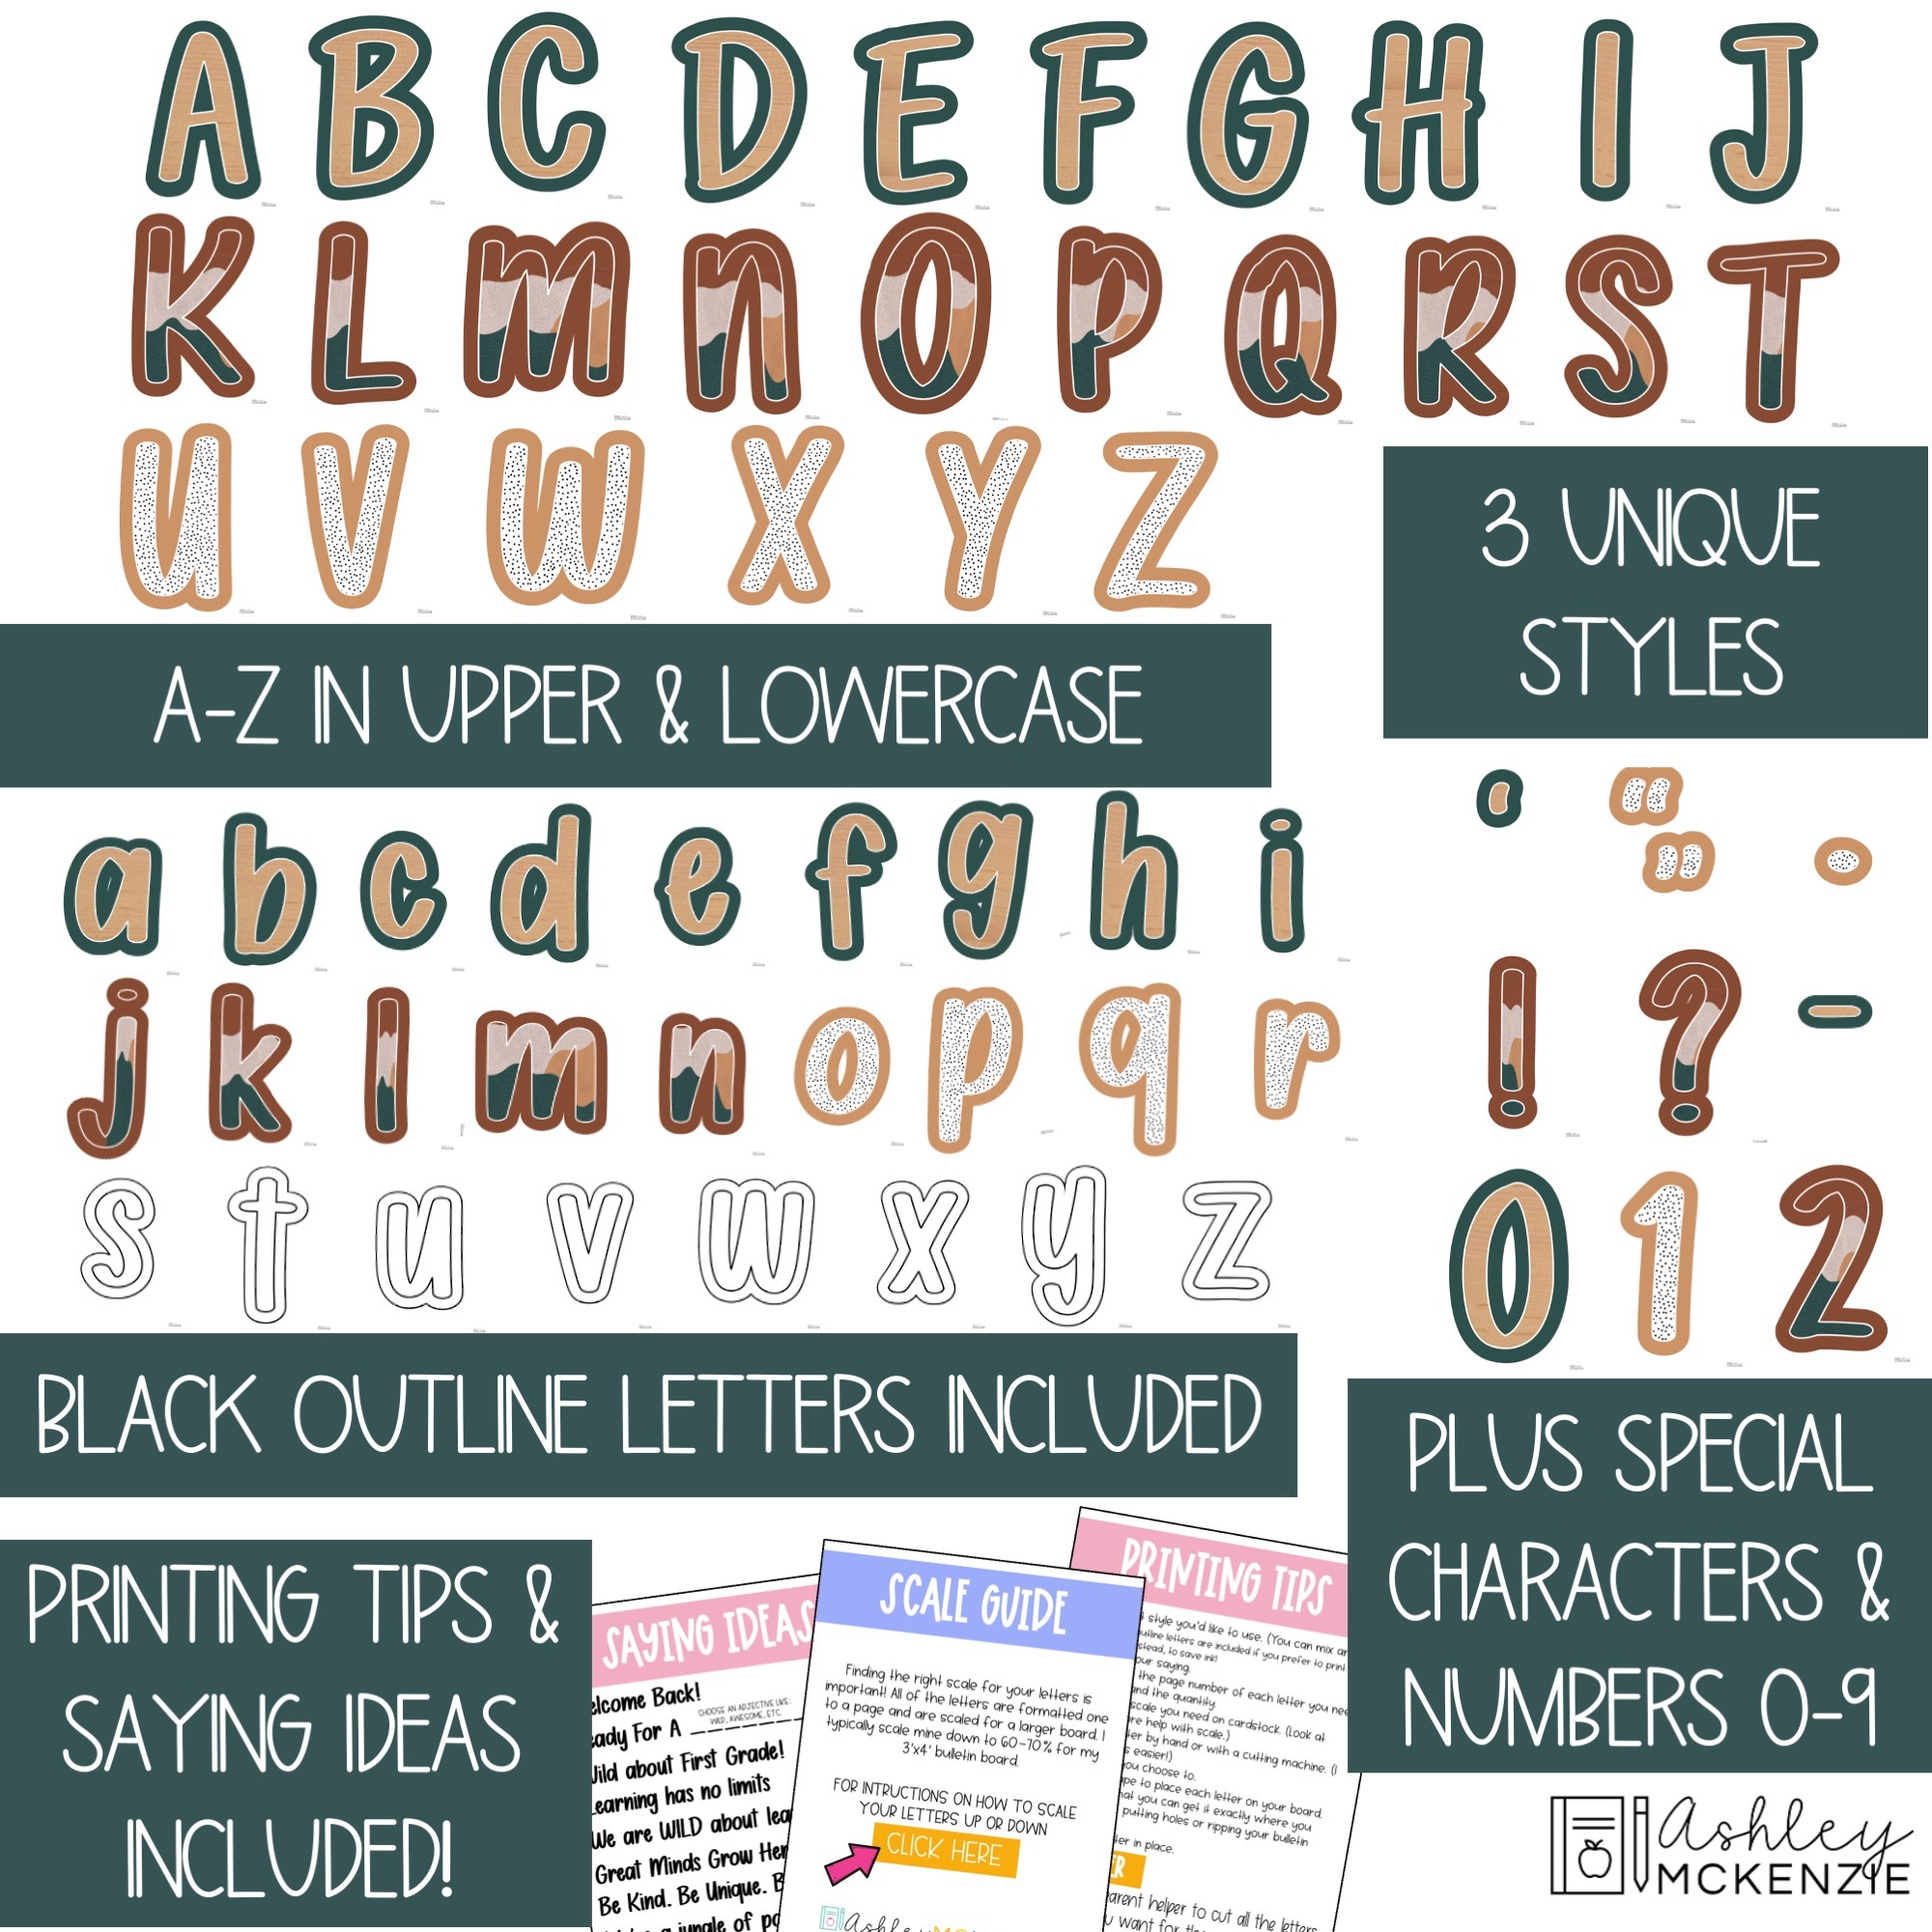 Abstract Landscape Primary Font A-Z Bulletin Board Letters to create any  saying you want! - Shop - Ashley McKenzie